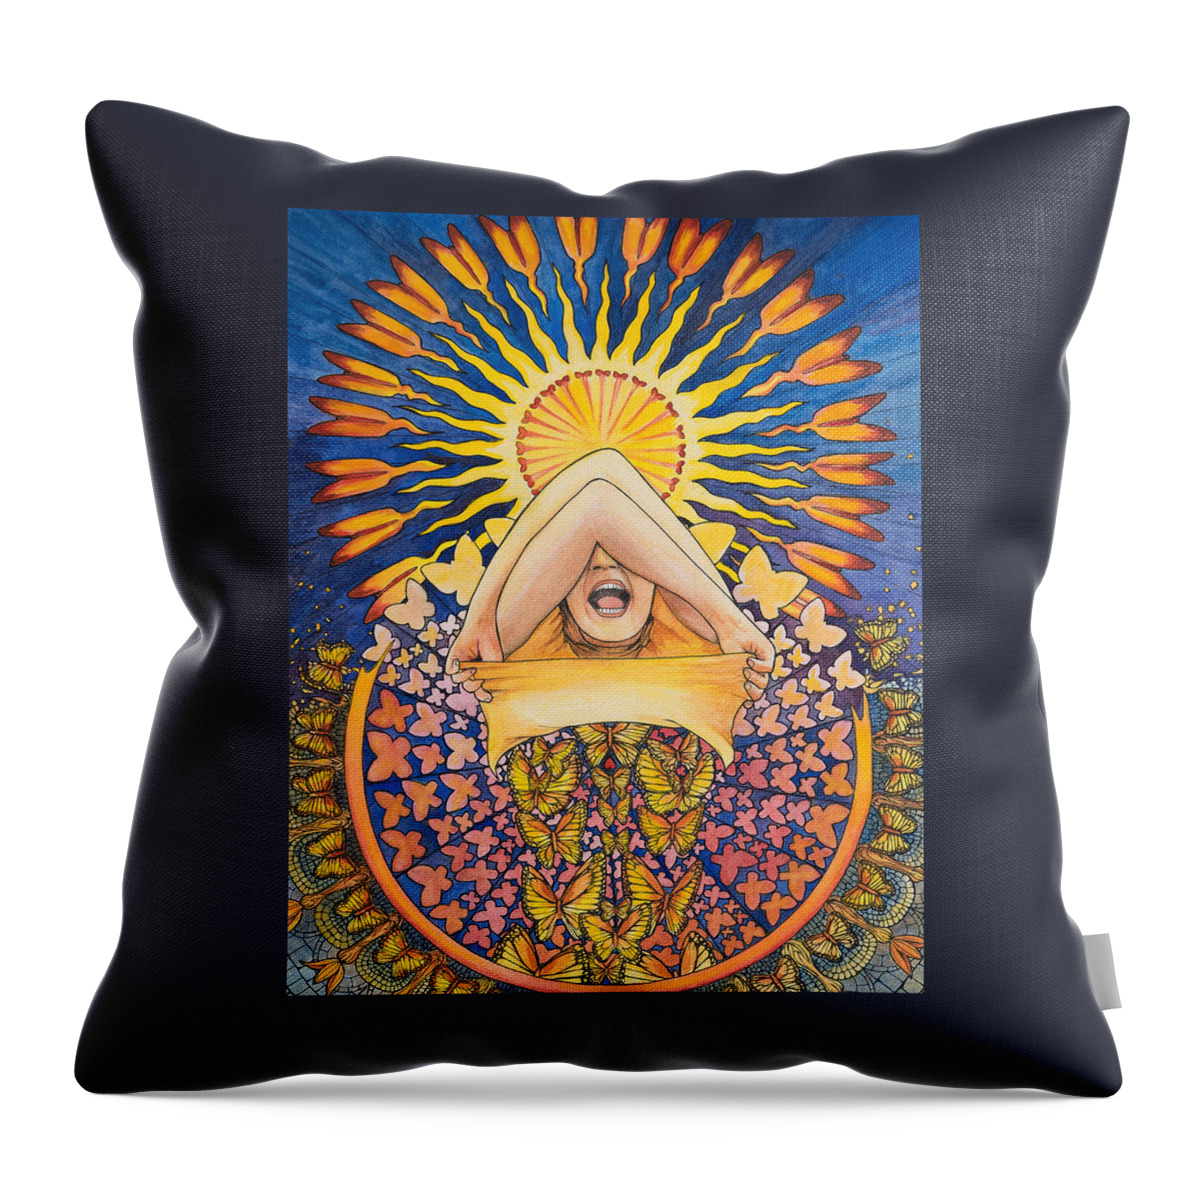 Butterfly Throw Pillow featuring the painting The Awakening Butterfly by Jon Roueche